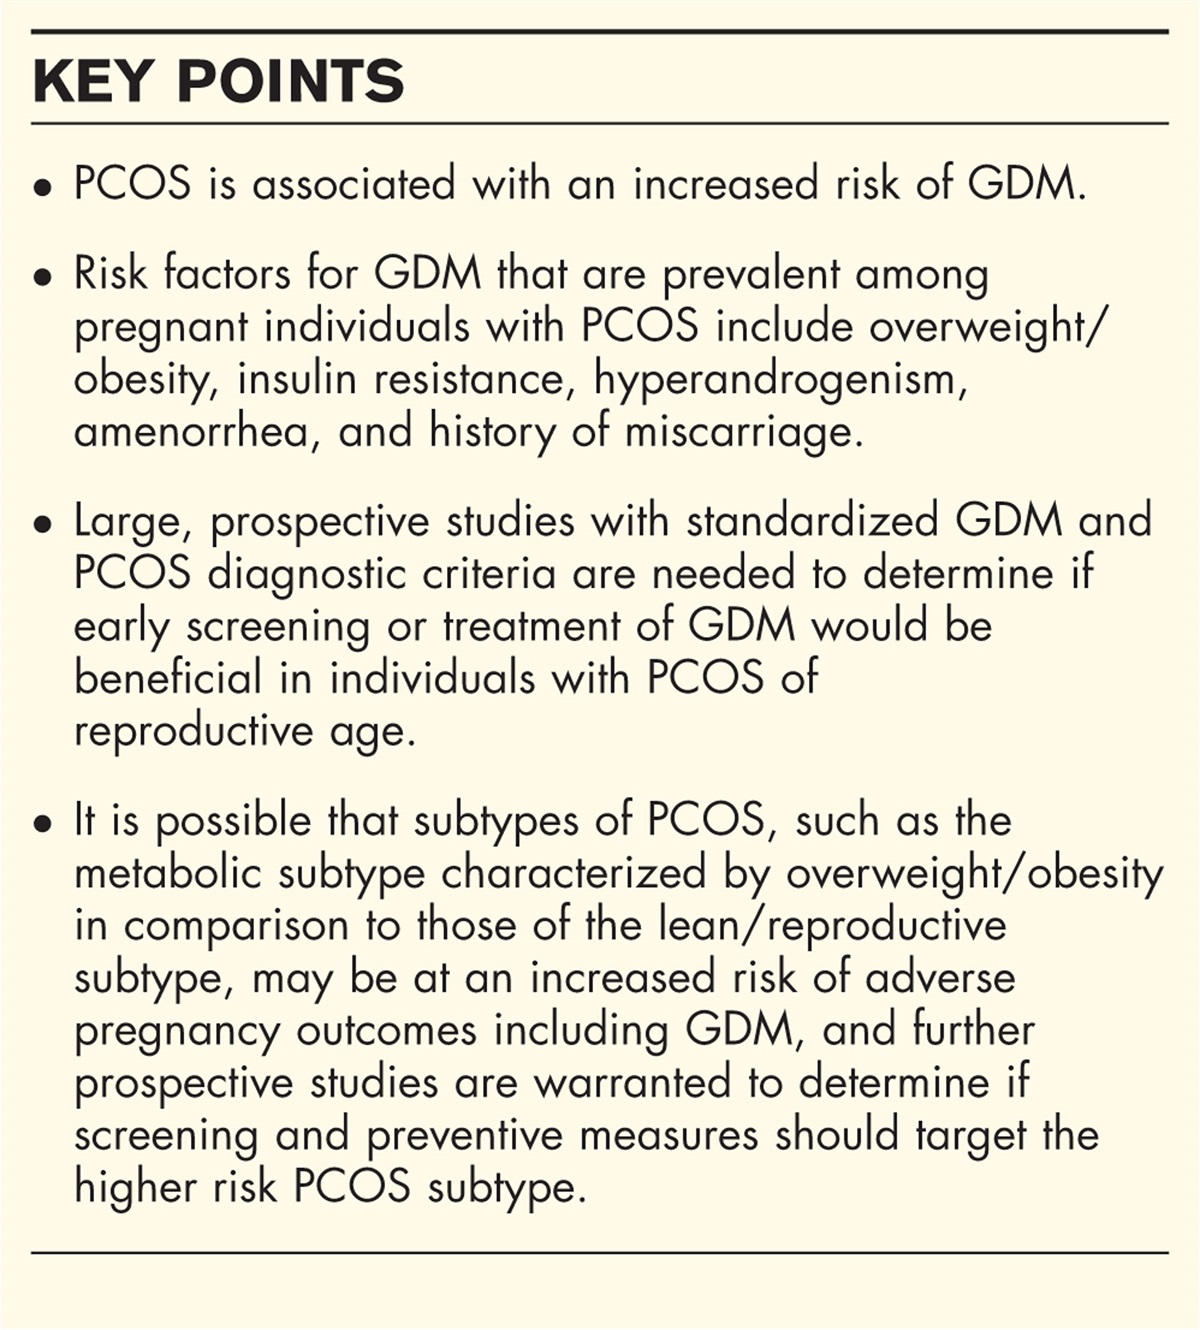 Gestational diabetes and other adverse pregnancy outcomes in polycystic ovary syndrome